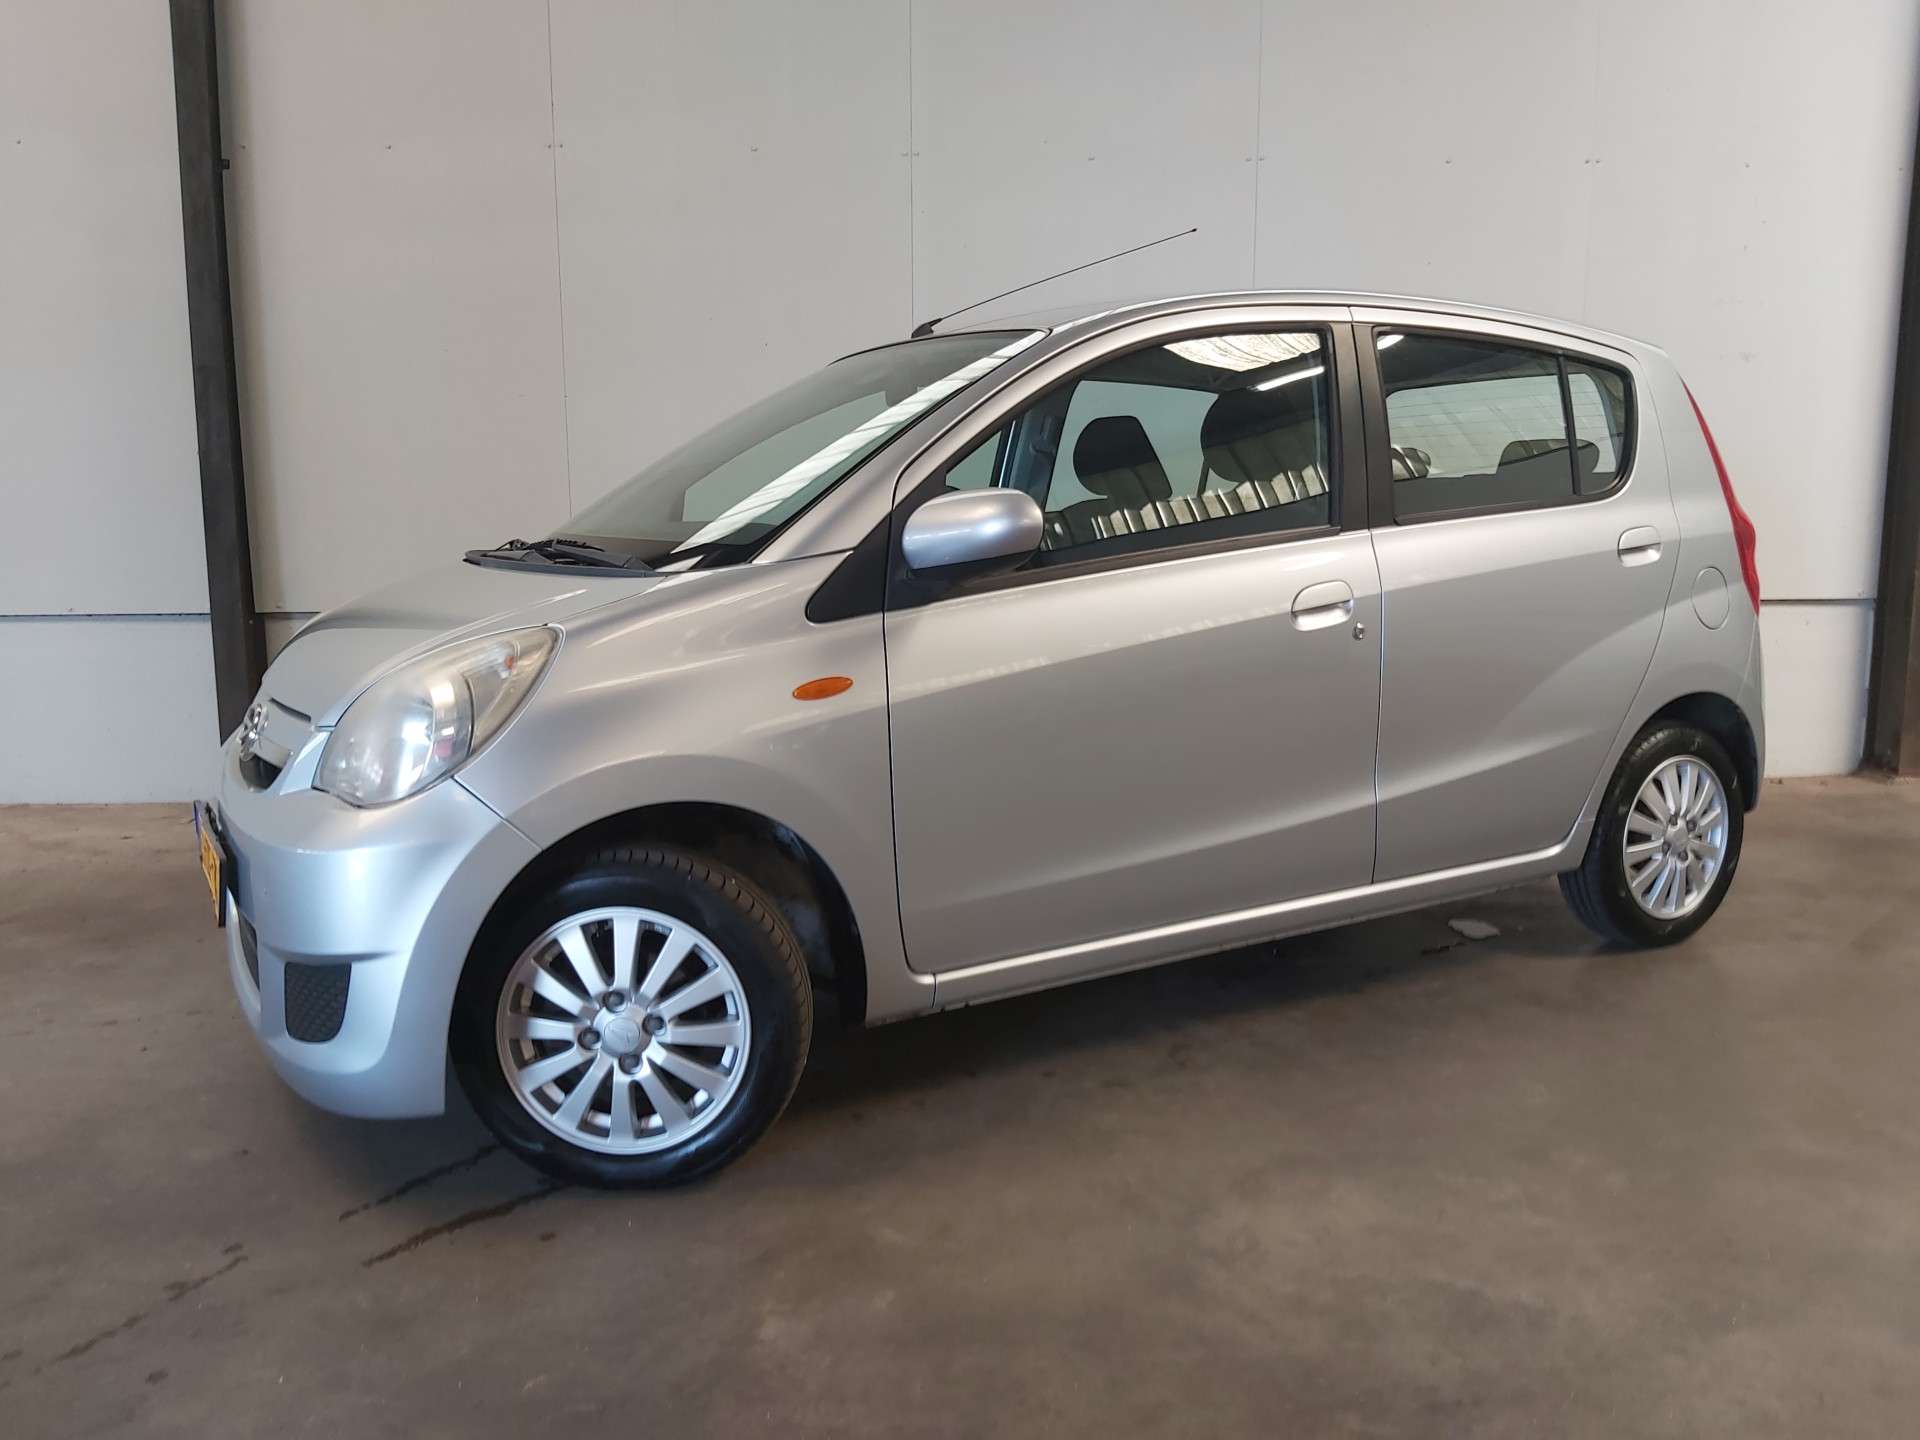 Daihatsu Cuore Compact in Grey used in KALLENKOTE for € 4,245.-